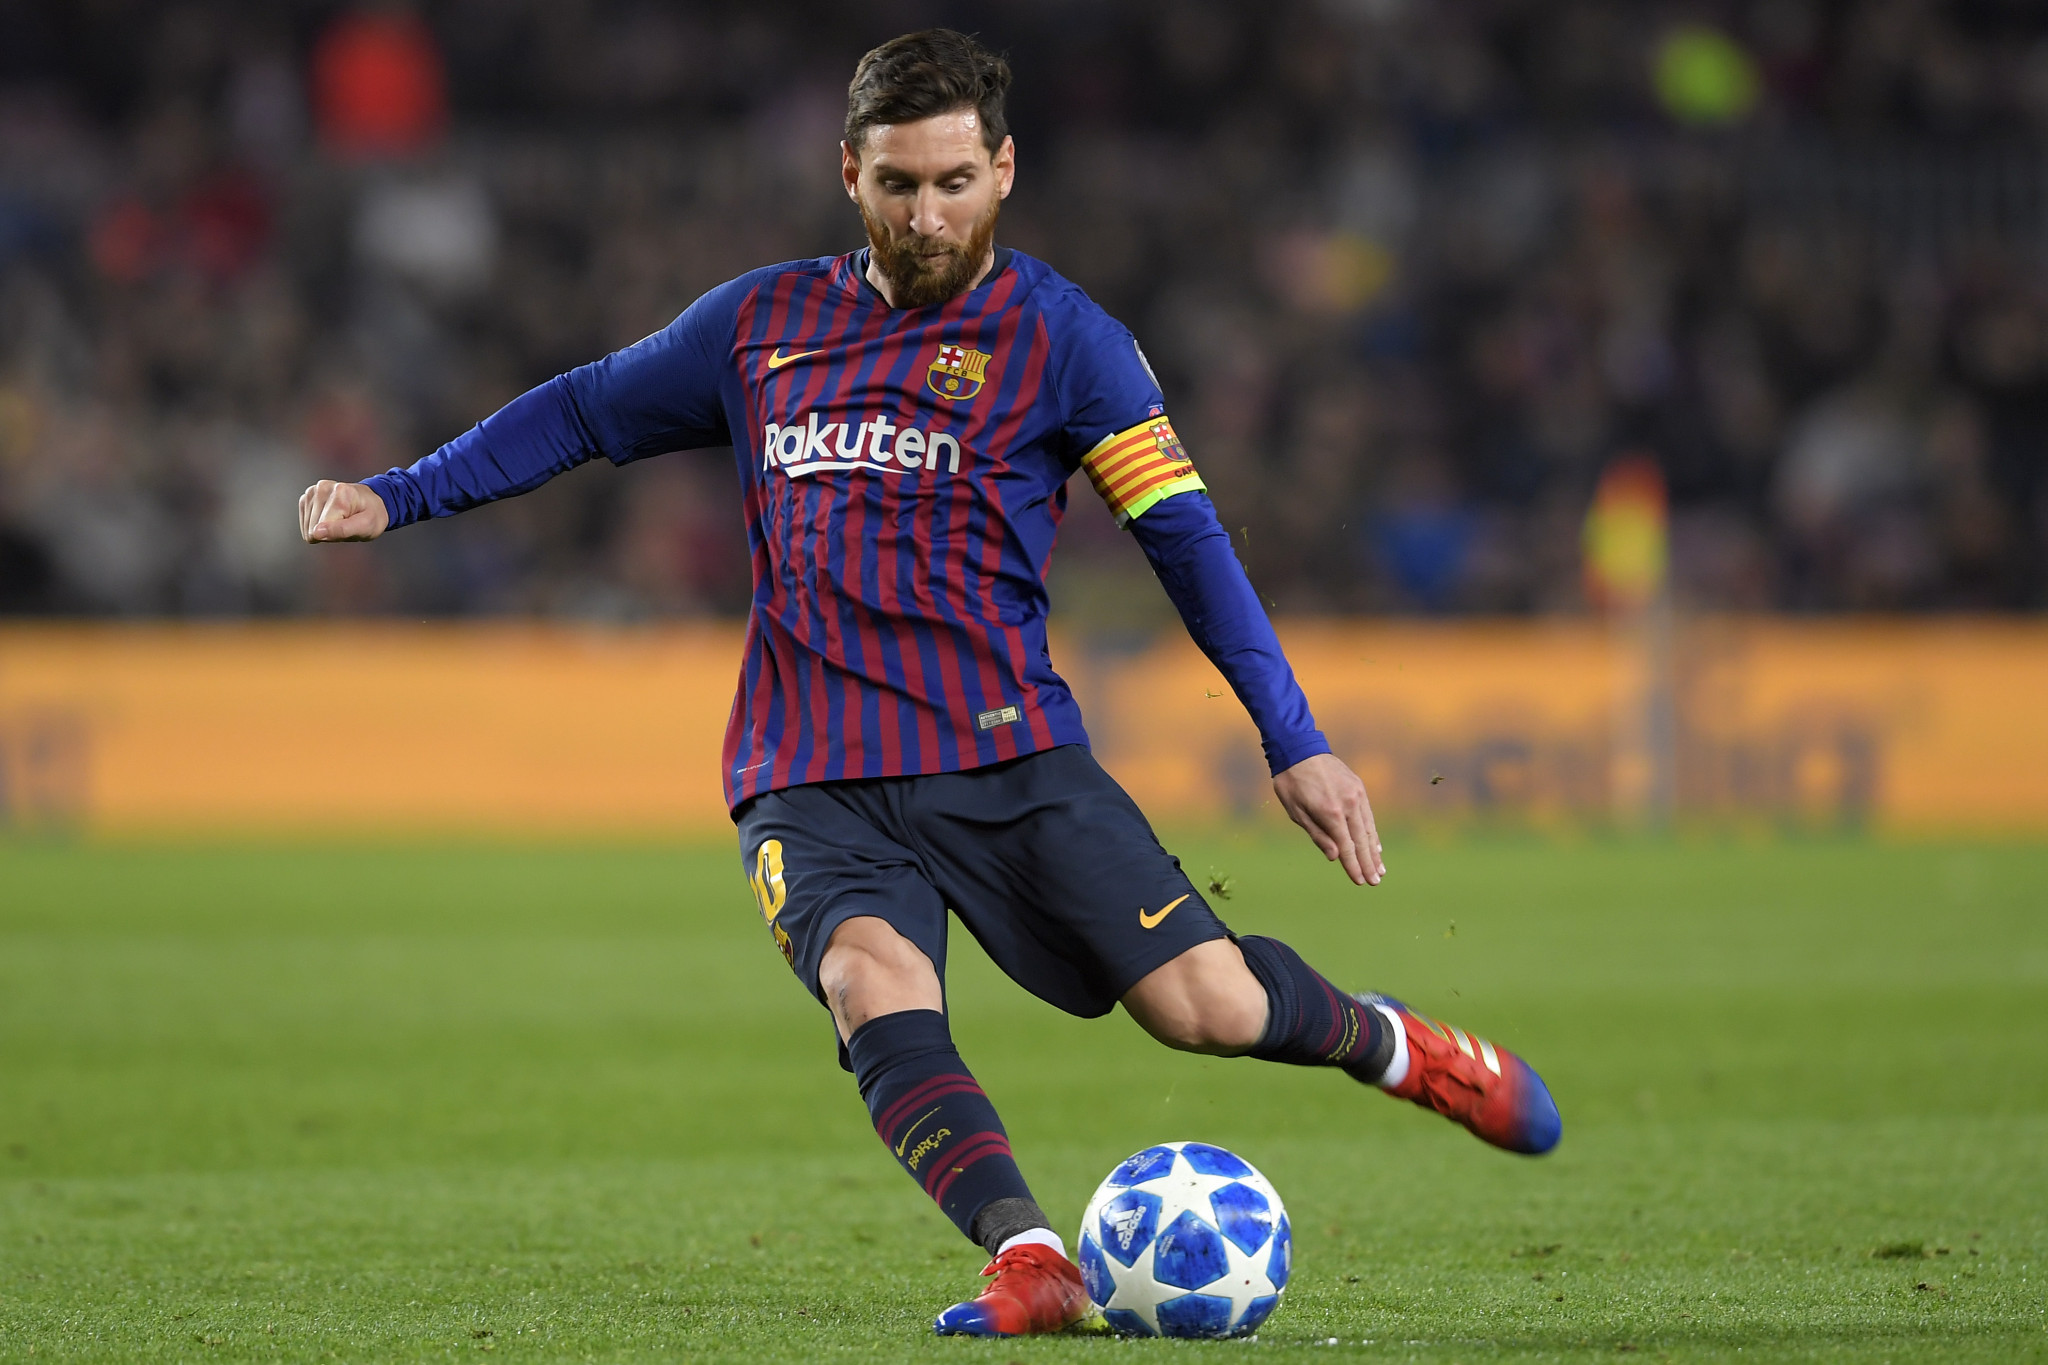 La Liga's plans to stage a regular season game in the United States have been scuppered after FC Barcelona withdrew their backing ©Getty Images